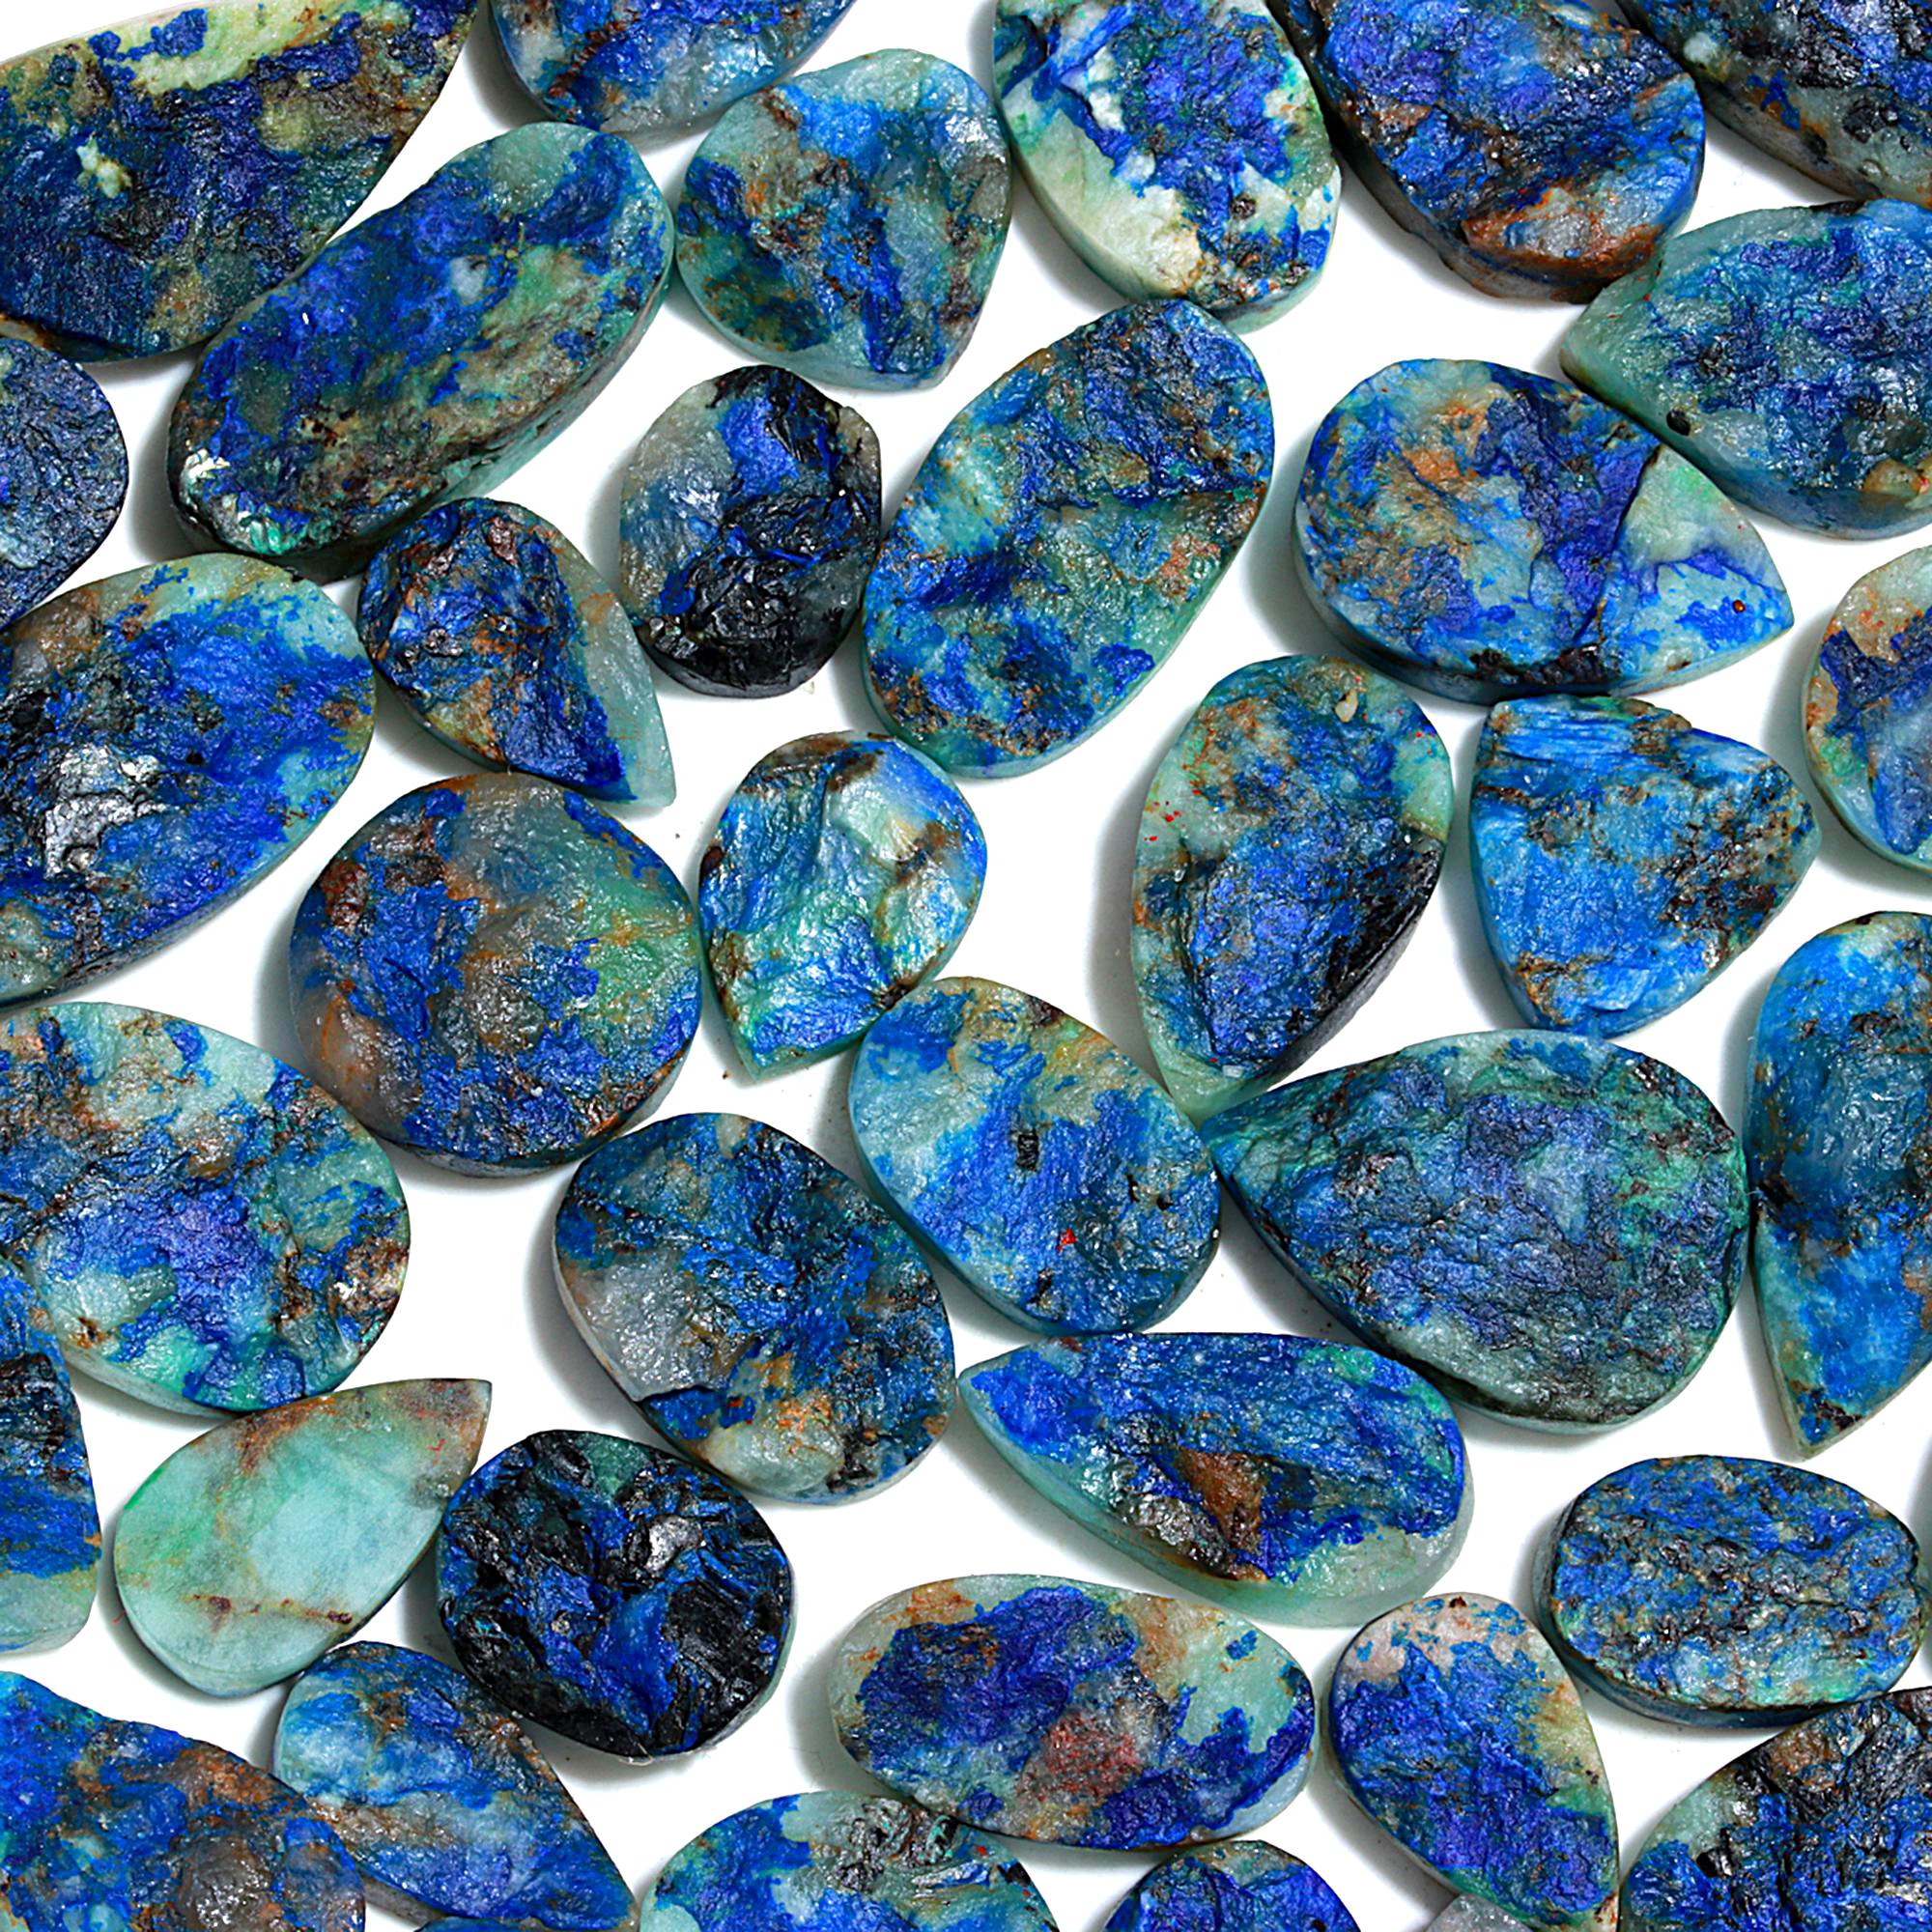 48 Pcs 735.Cts Natural Azurite Druzy Unpolished Loose Cabochon Gemstone For Jewelry Wholesale Lot Size 32x15 13x13mm